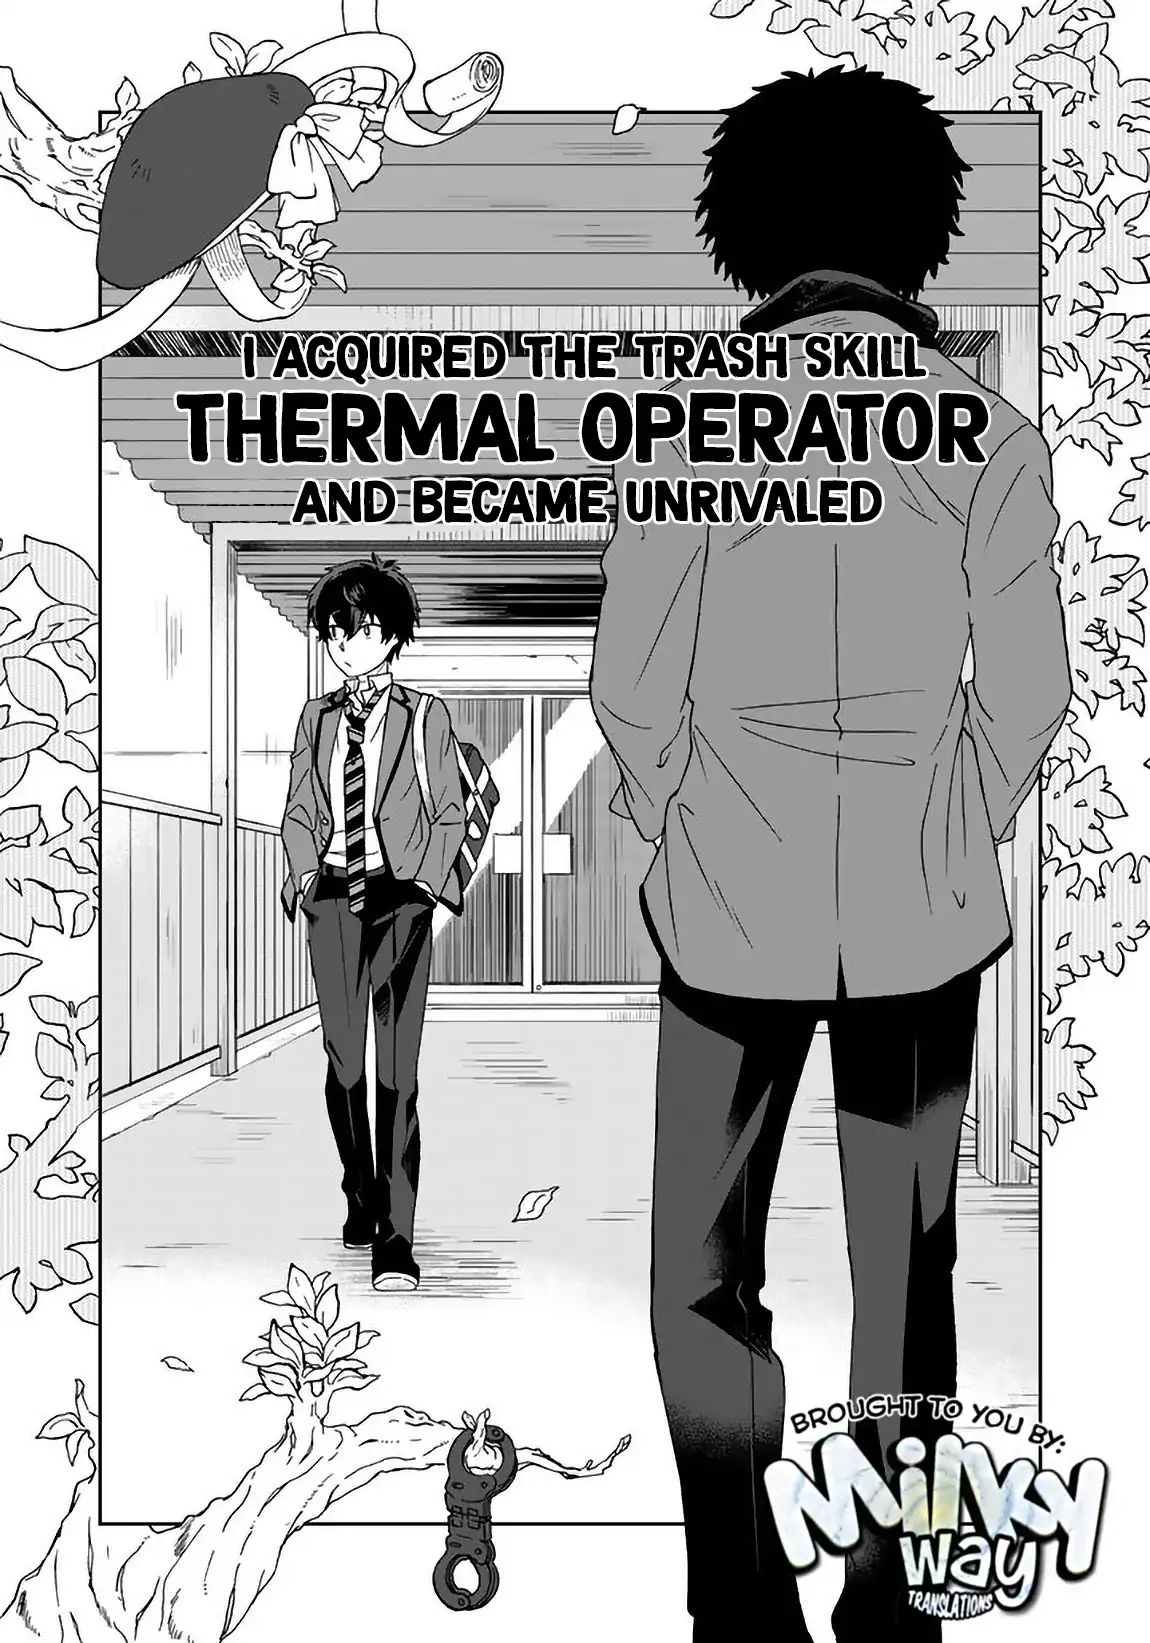 I, Who Possessed A Trash Skill 【Thermal Operator】, Became Unrivaled. Chapter 5